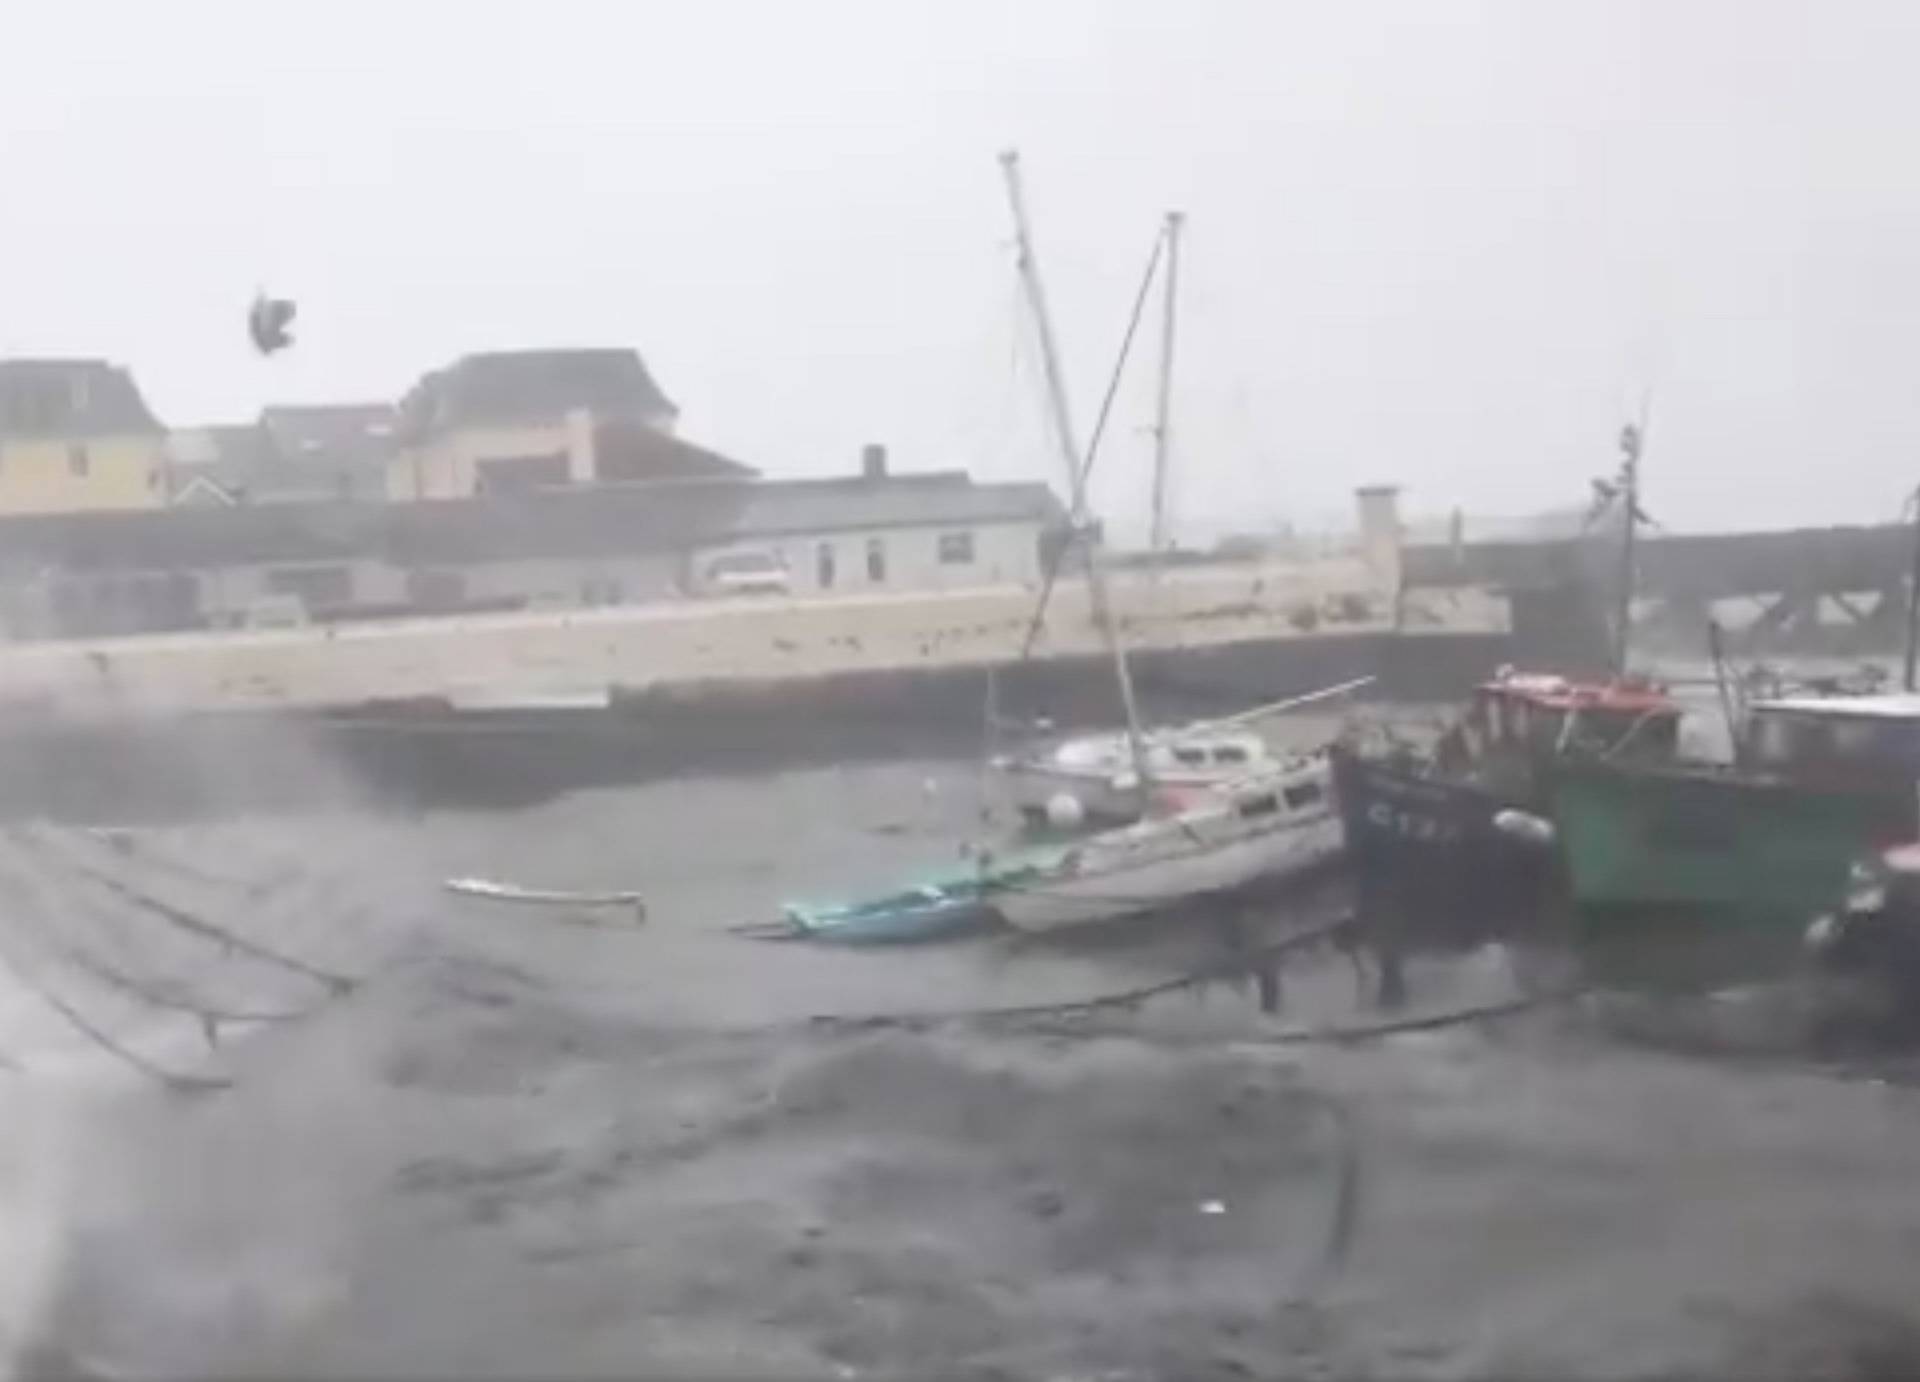 Winds batter the harbour as storm Ophelia hits Cork